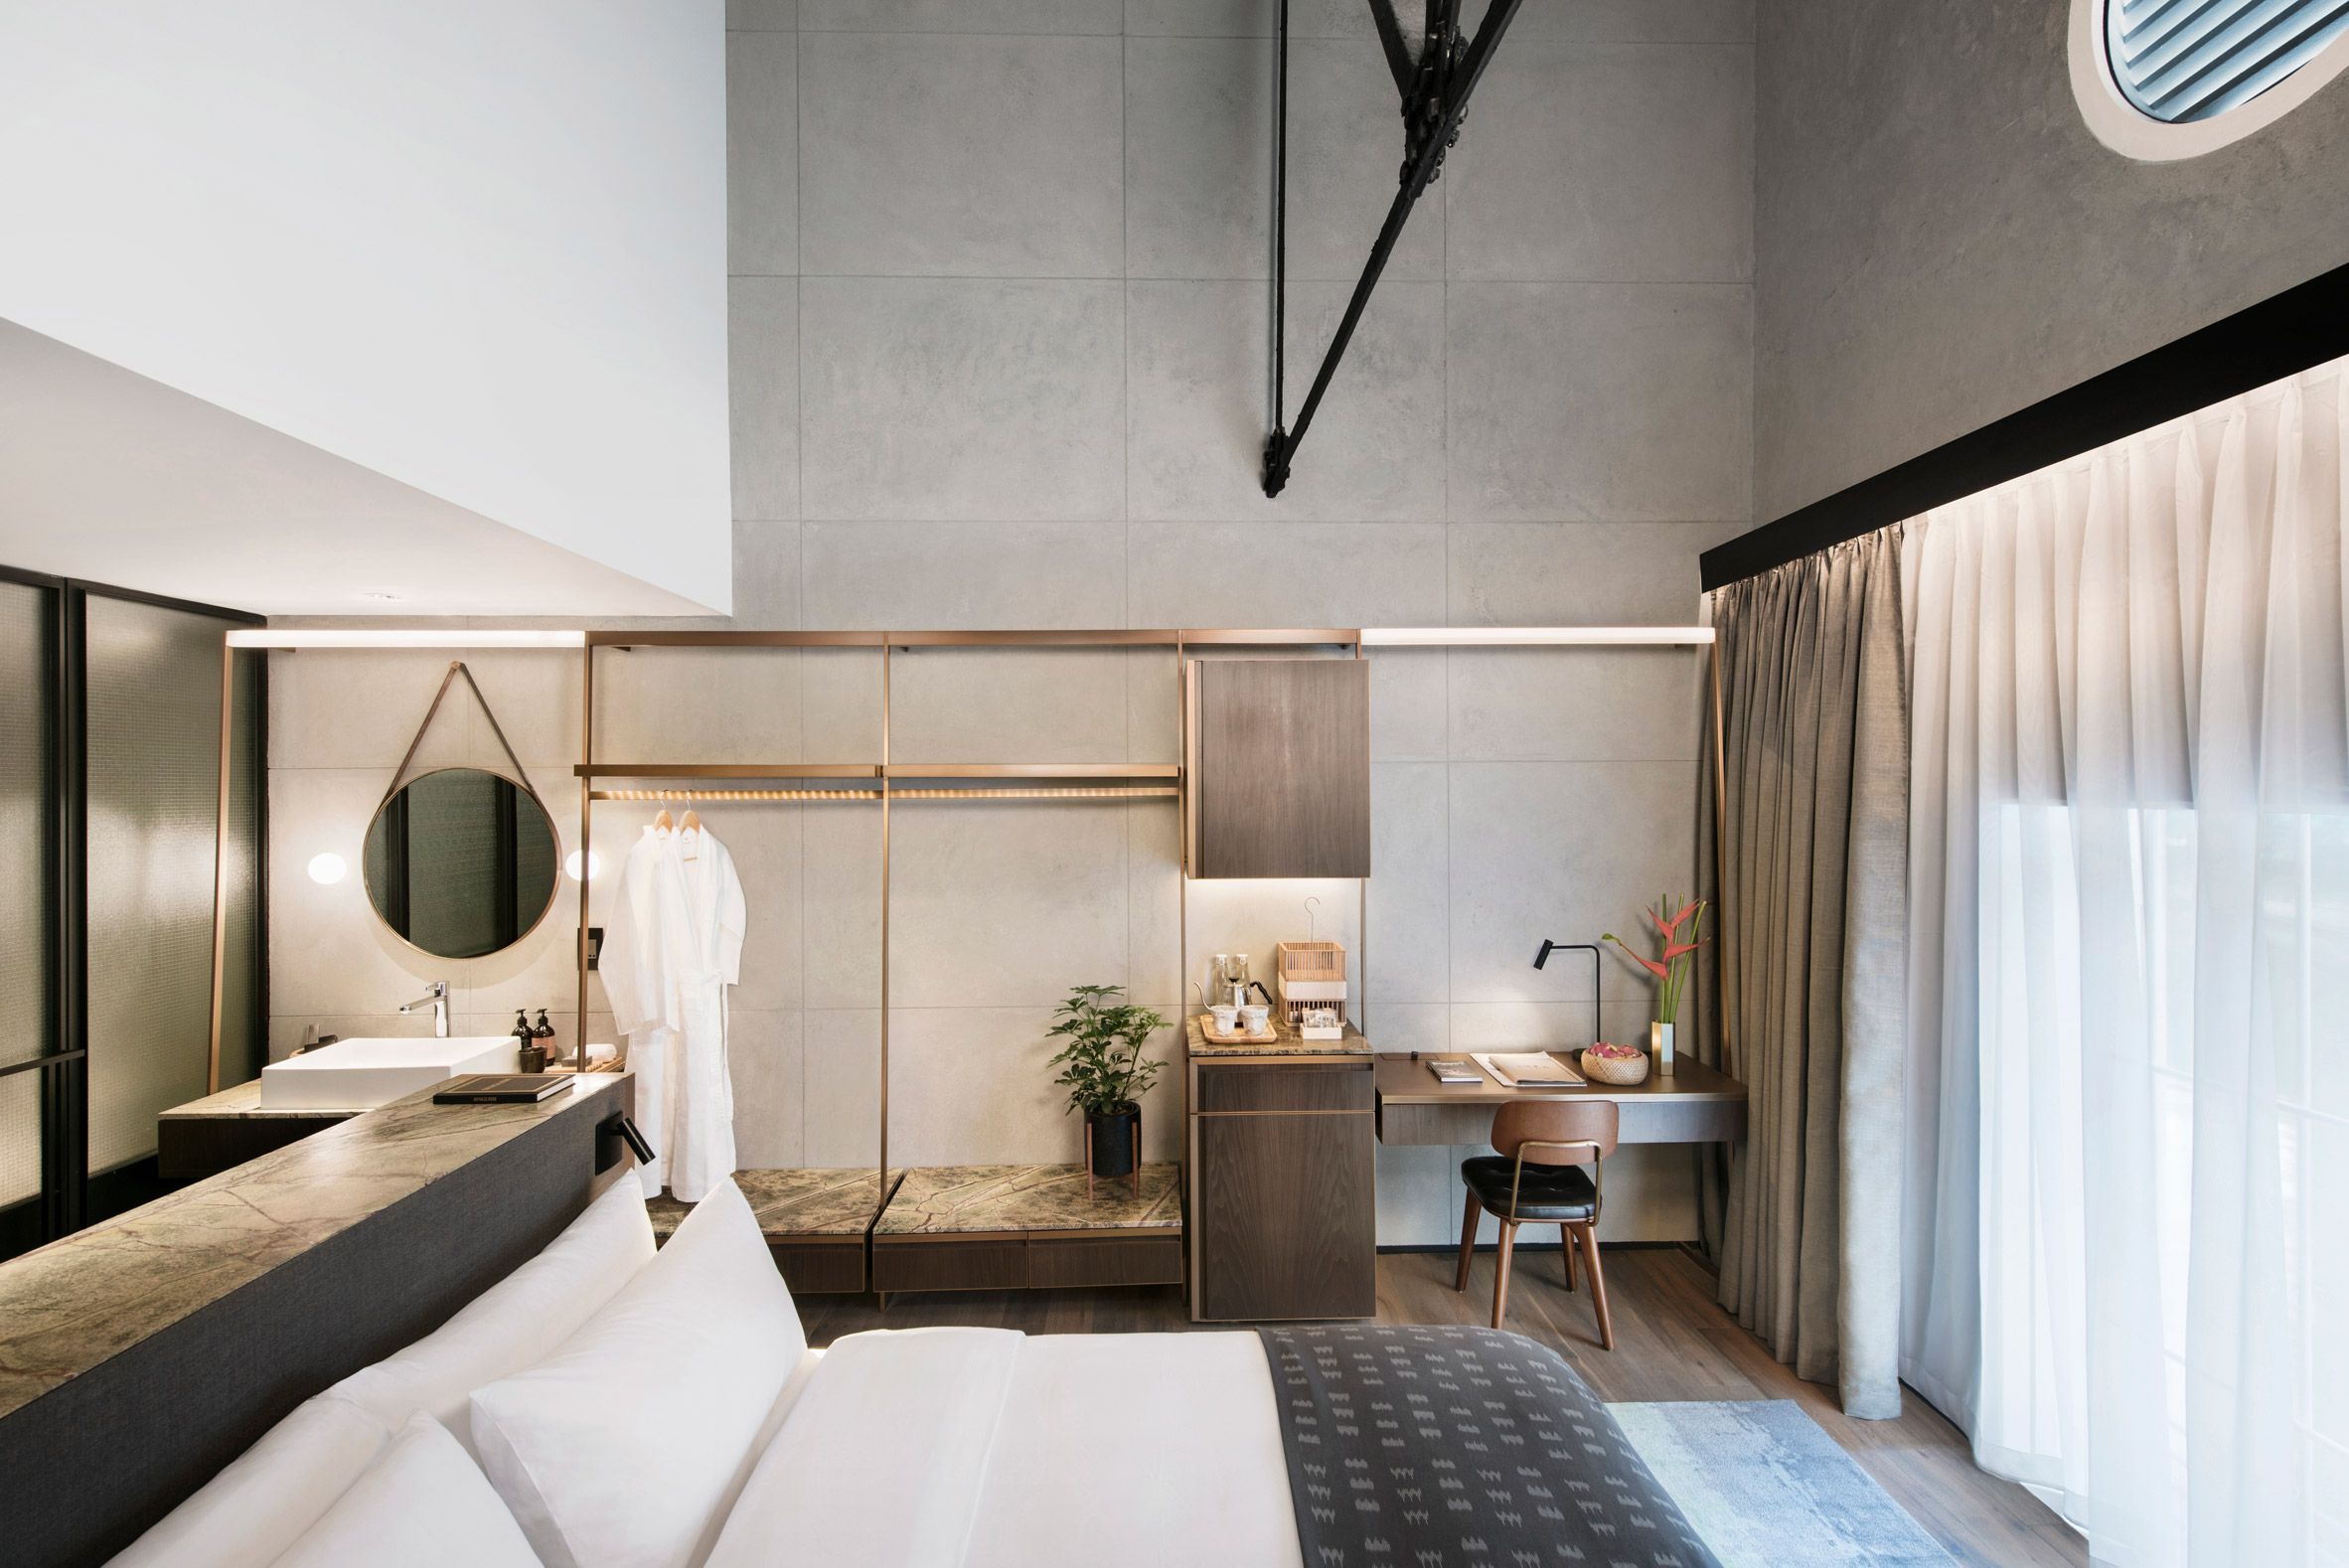 Warehouse hotel designed by Asylum and Zarch Collaboratives